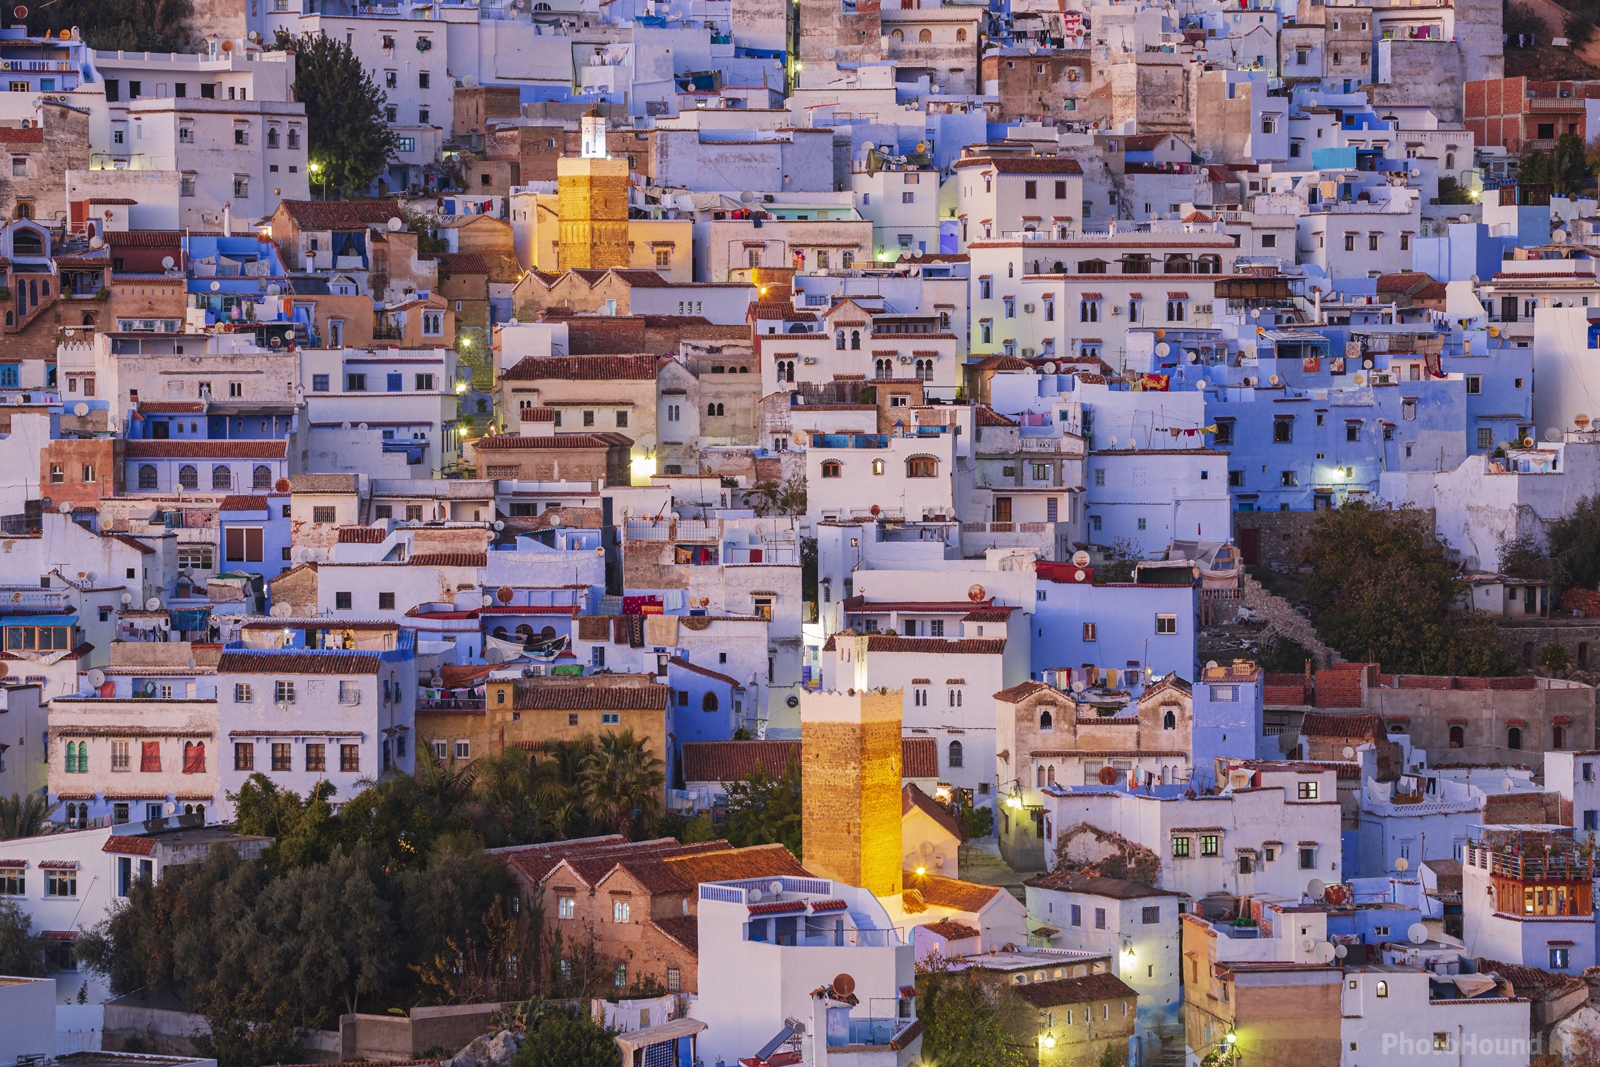 Image of Spanish Mosque at Chefchaouen by Jeremy Woodhouse